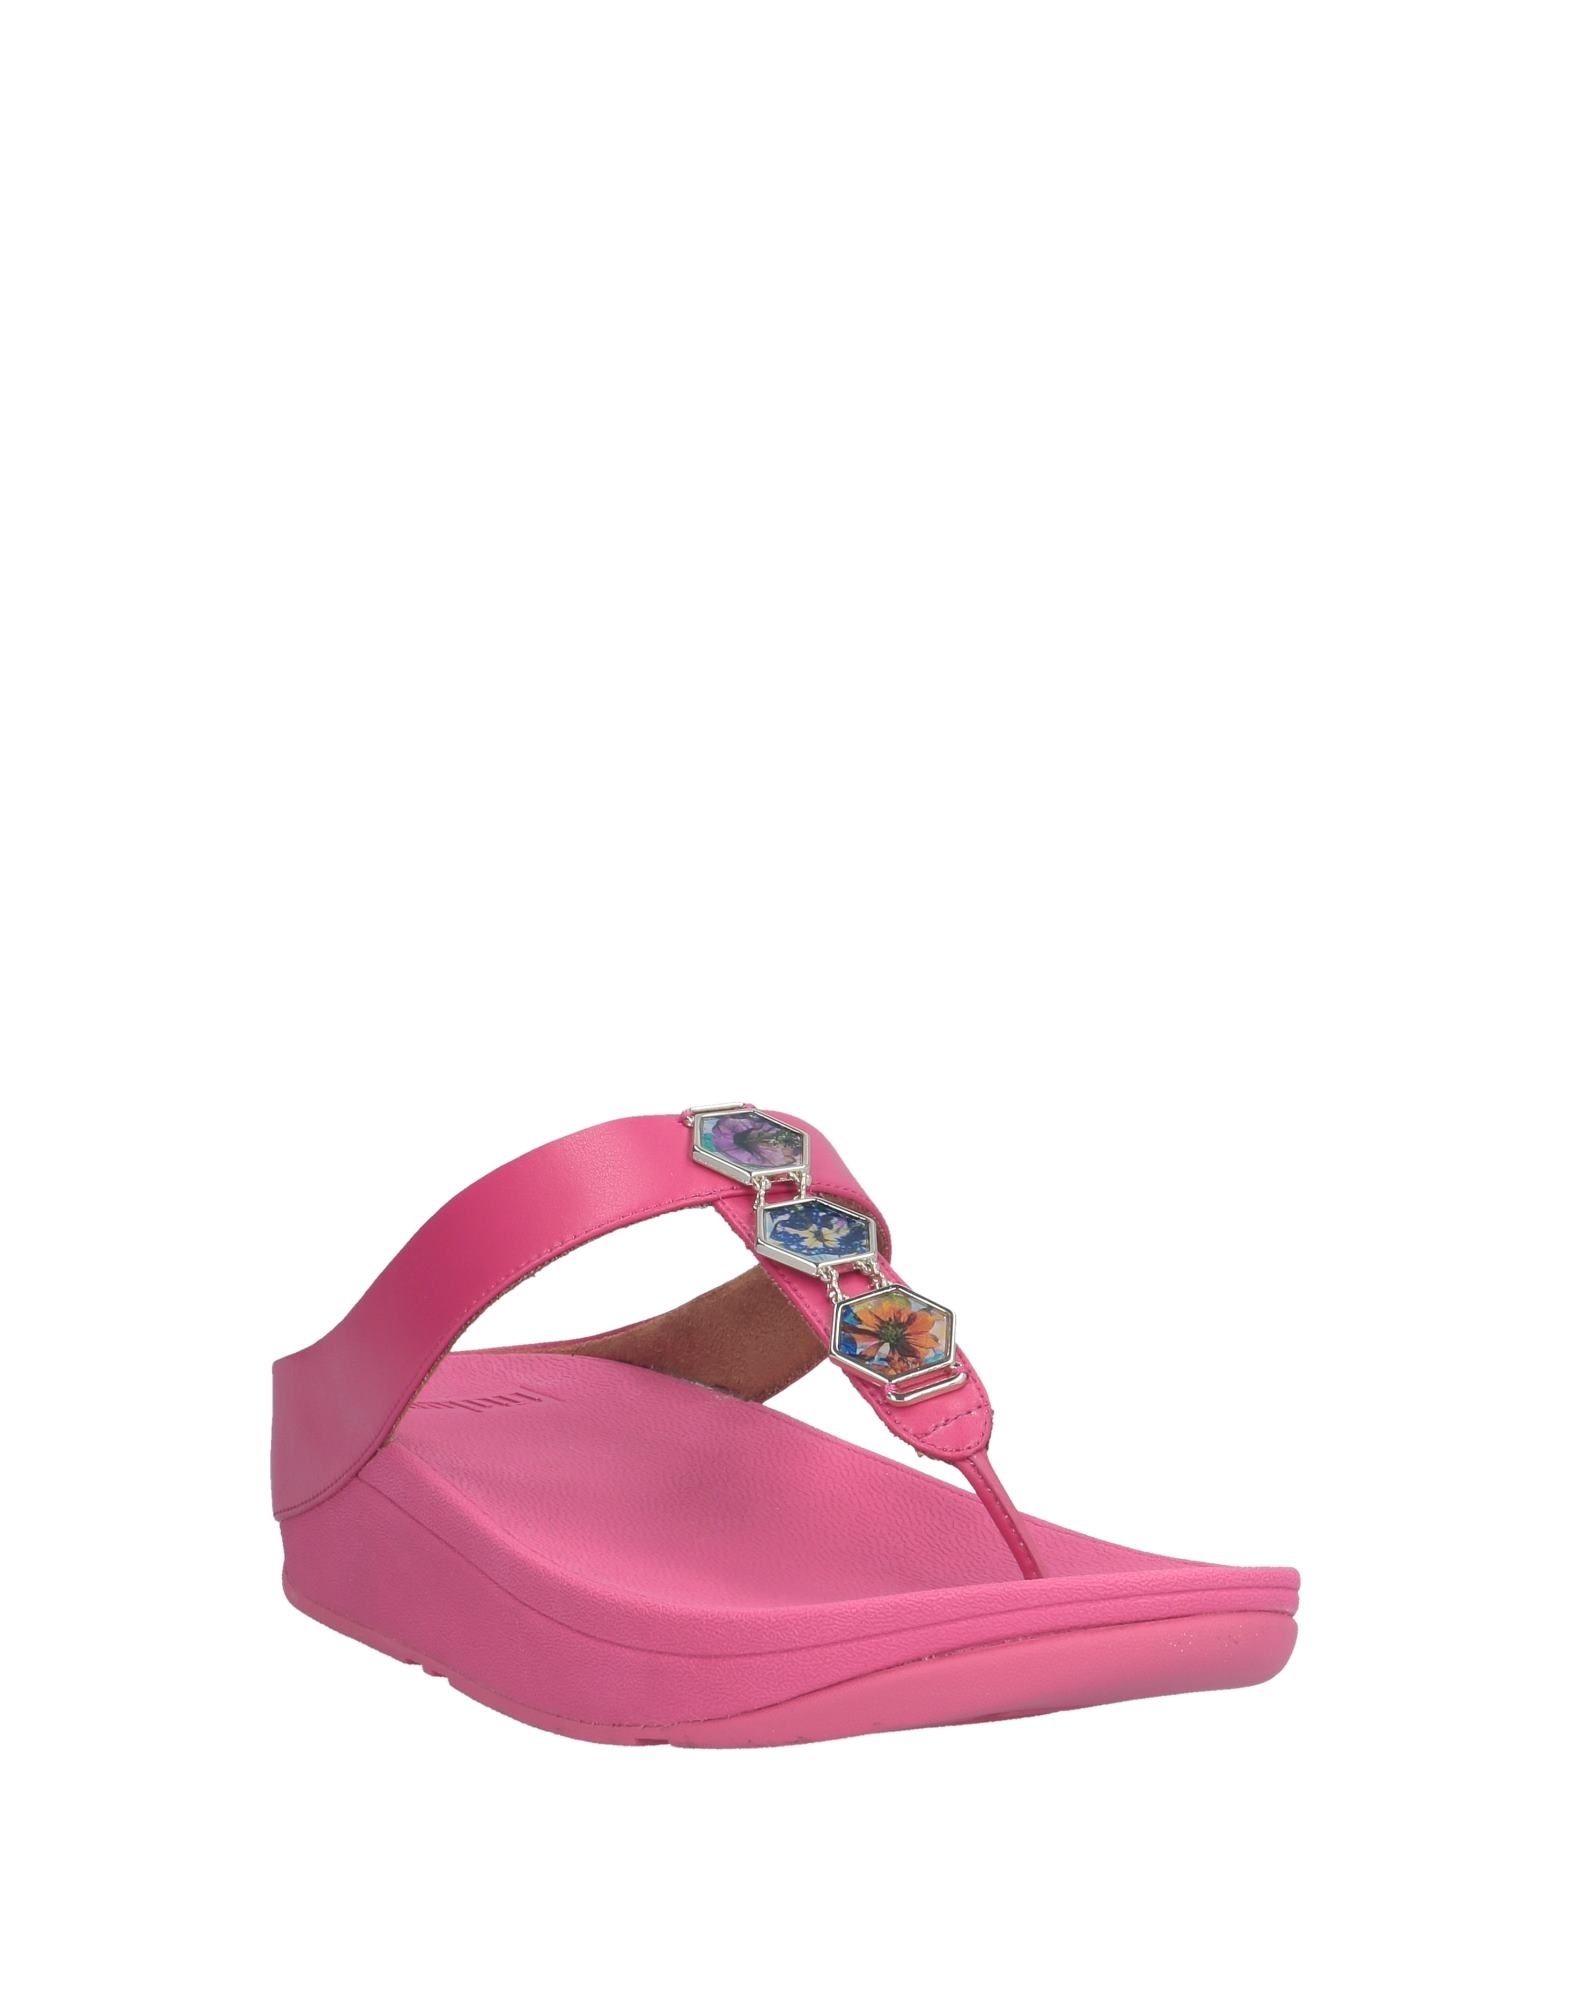 Fitflop Toe Post Sandals in Pink | Lyst